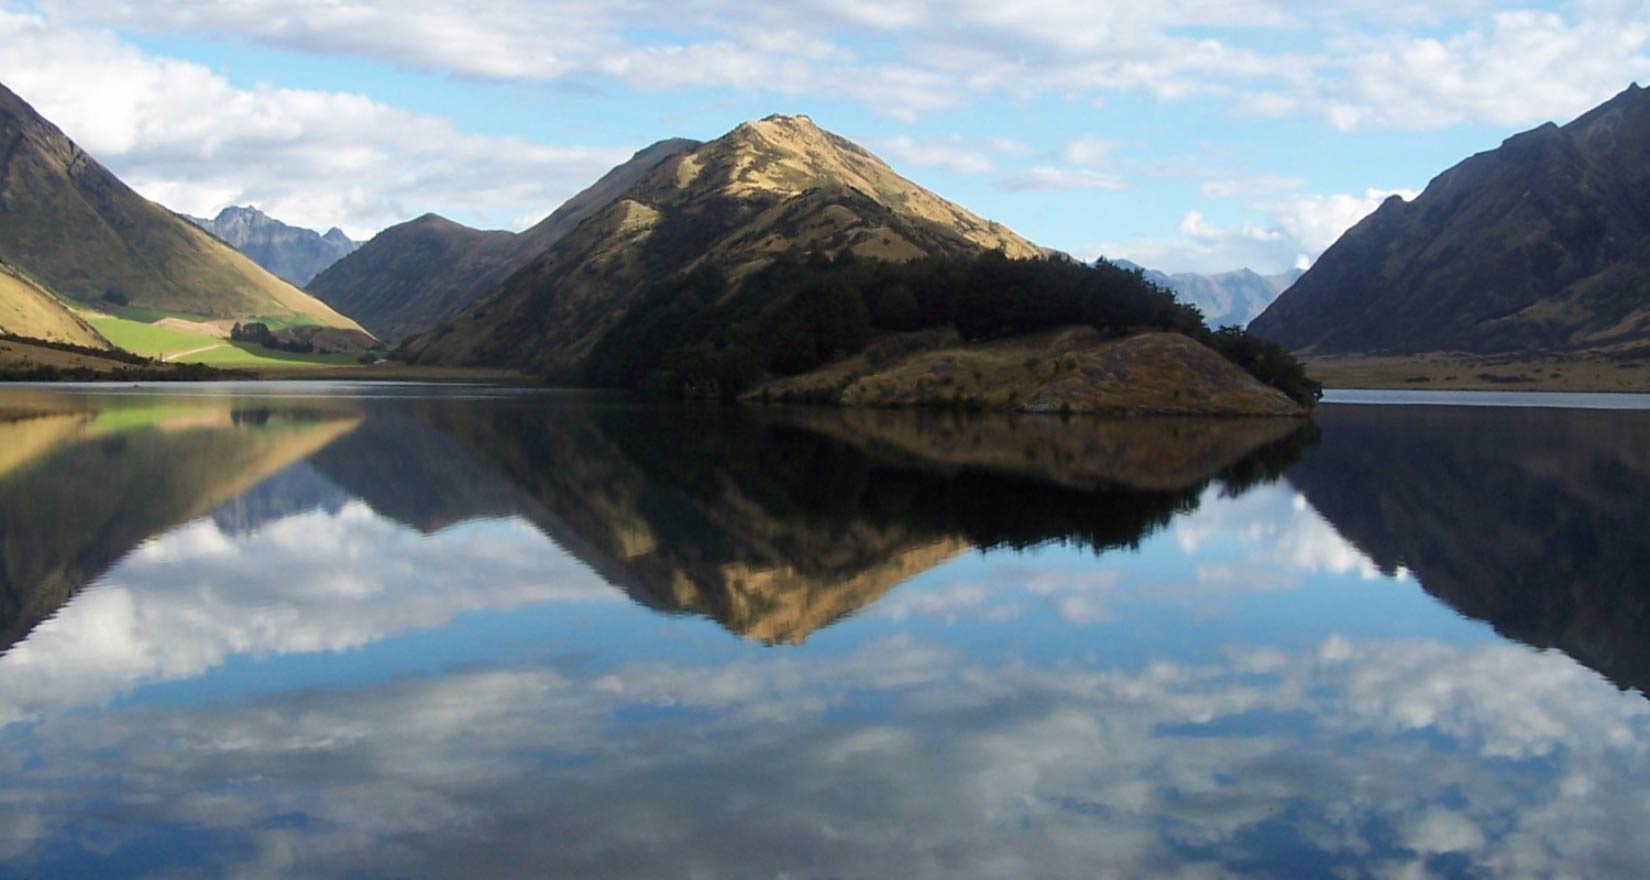 Queenstown New Zealand. Book your Queenstown Holiday. Activities. Tours. Accommodation. Transport.